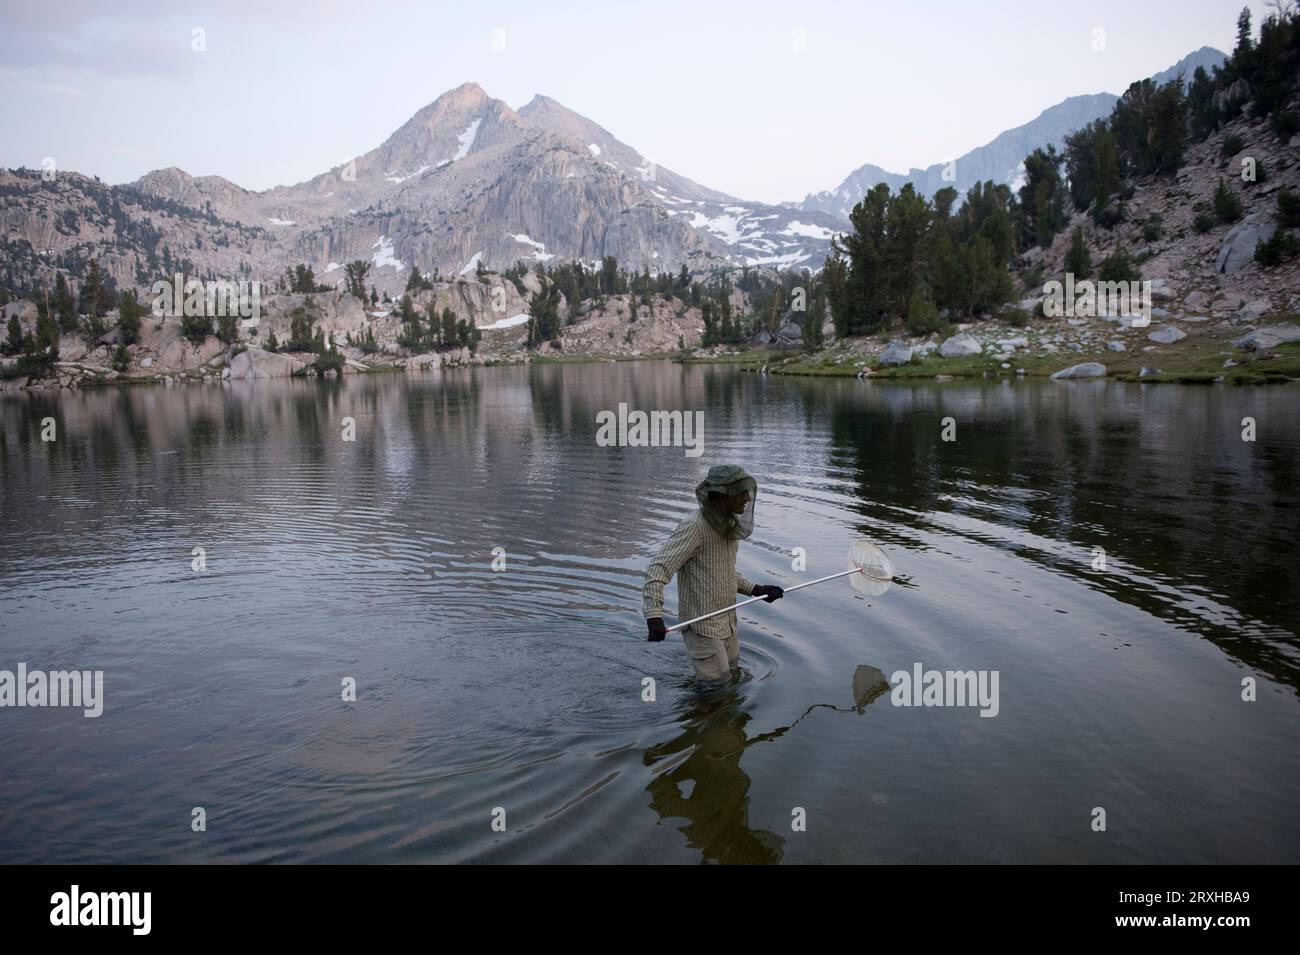 Man uses a net to catch fish at Sixty Lake Basin, Kings Canyon National Park, California, USA; California, United States of America Stock Photo